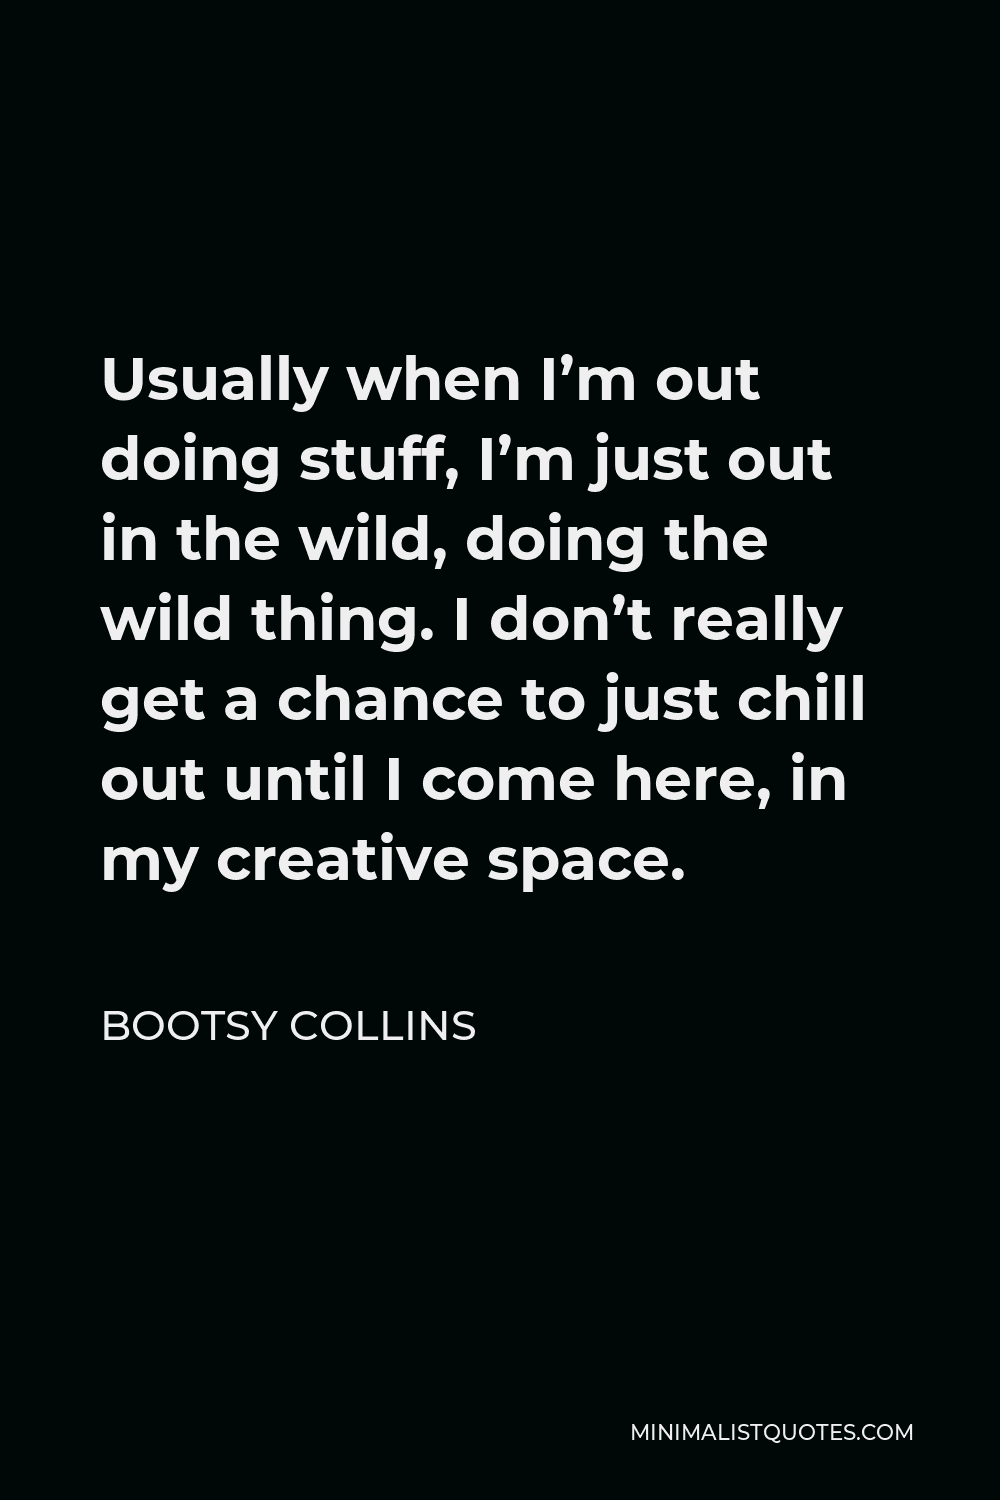 Bootsy Collins Quote - Usually when I’m out doing stuff, I’m just out in the wild, doing the wild thing. I don’t really get a chance to just chill out until I come here, in my creative space.